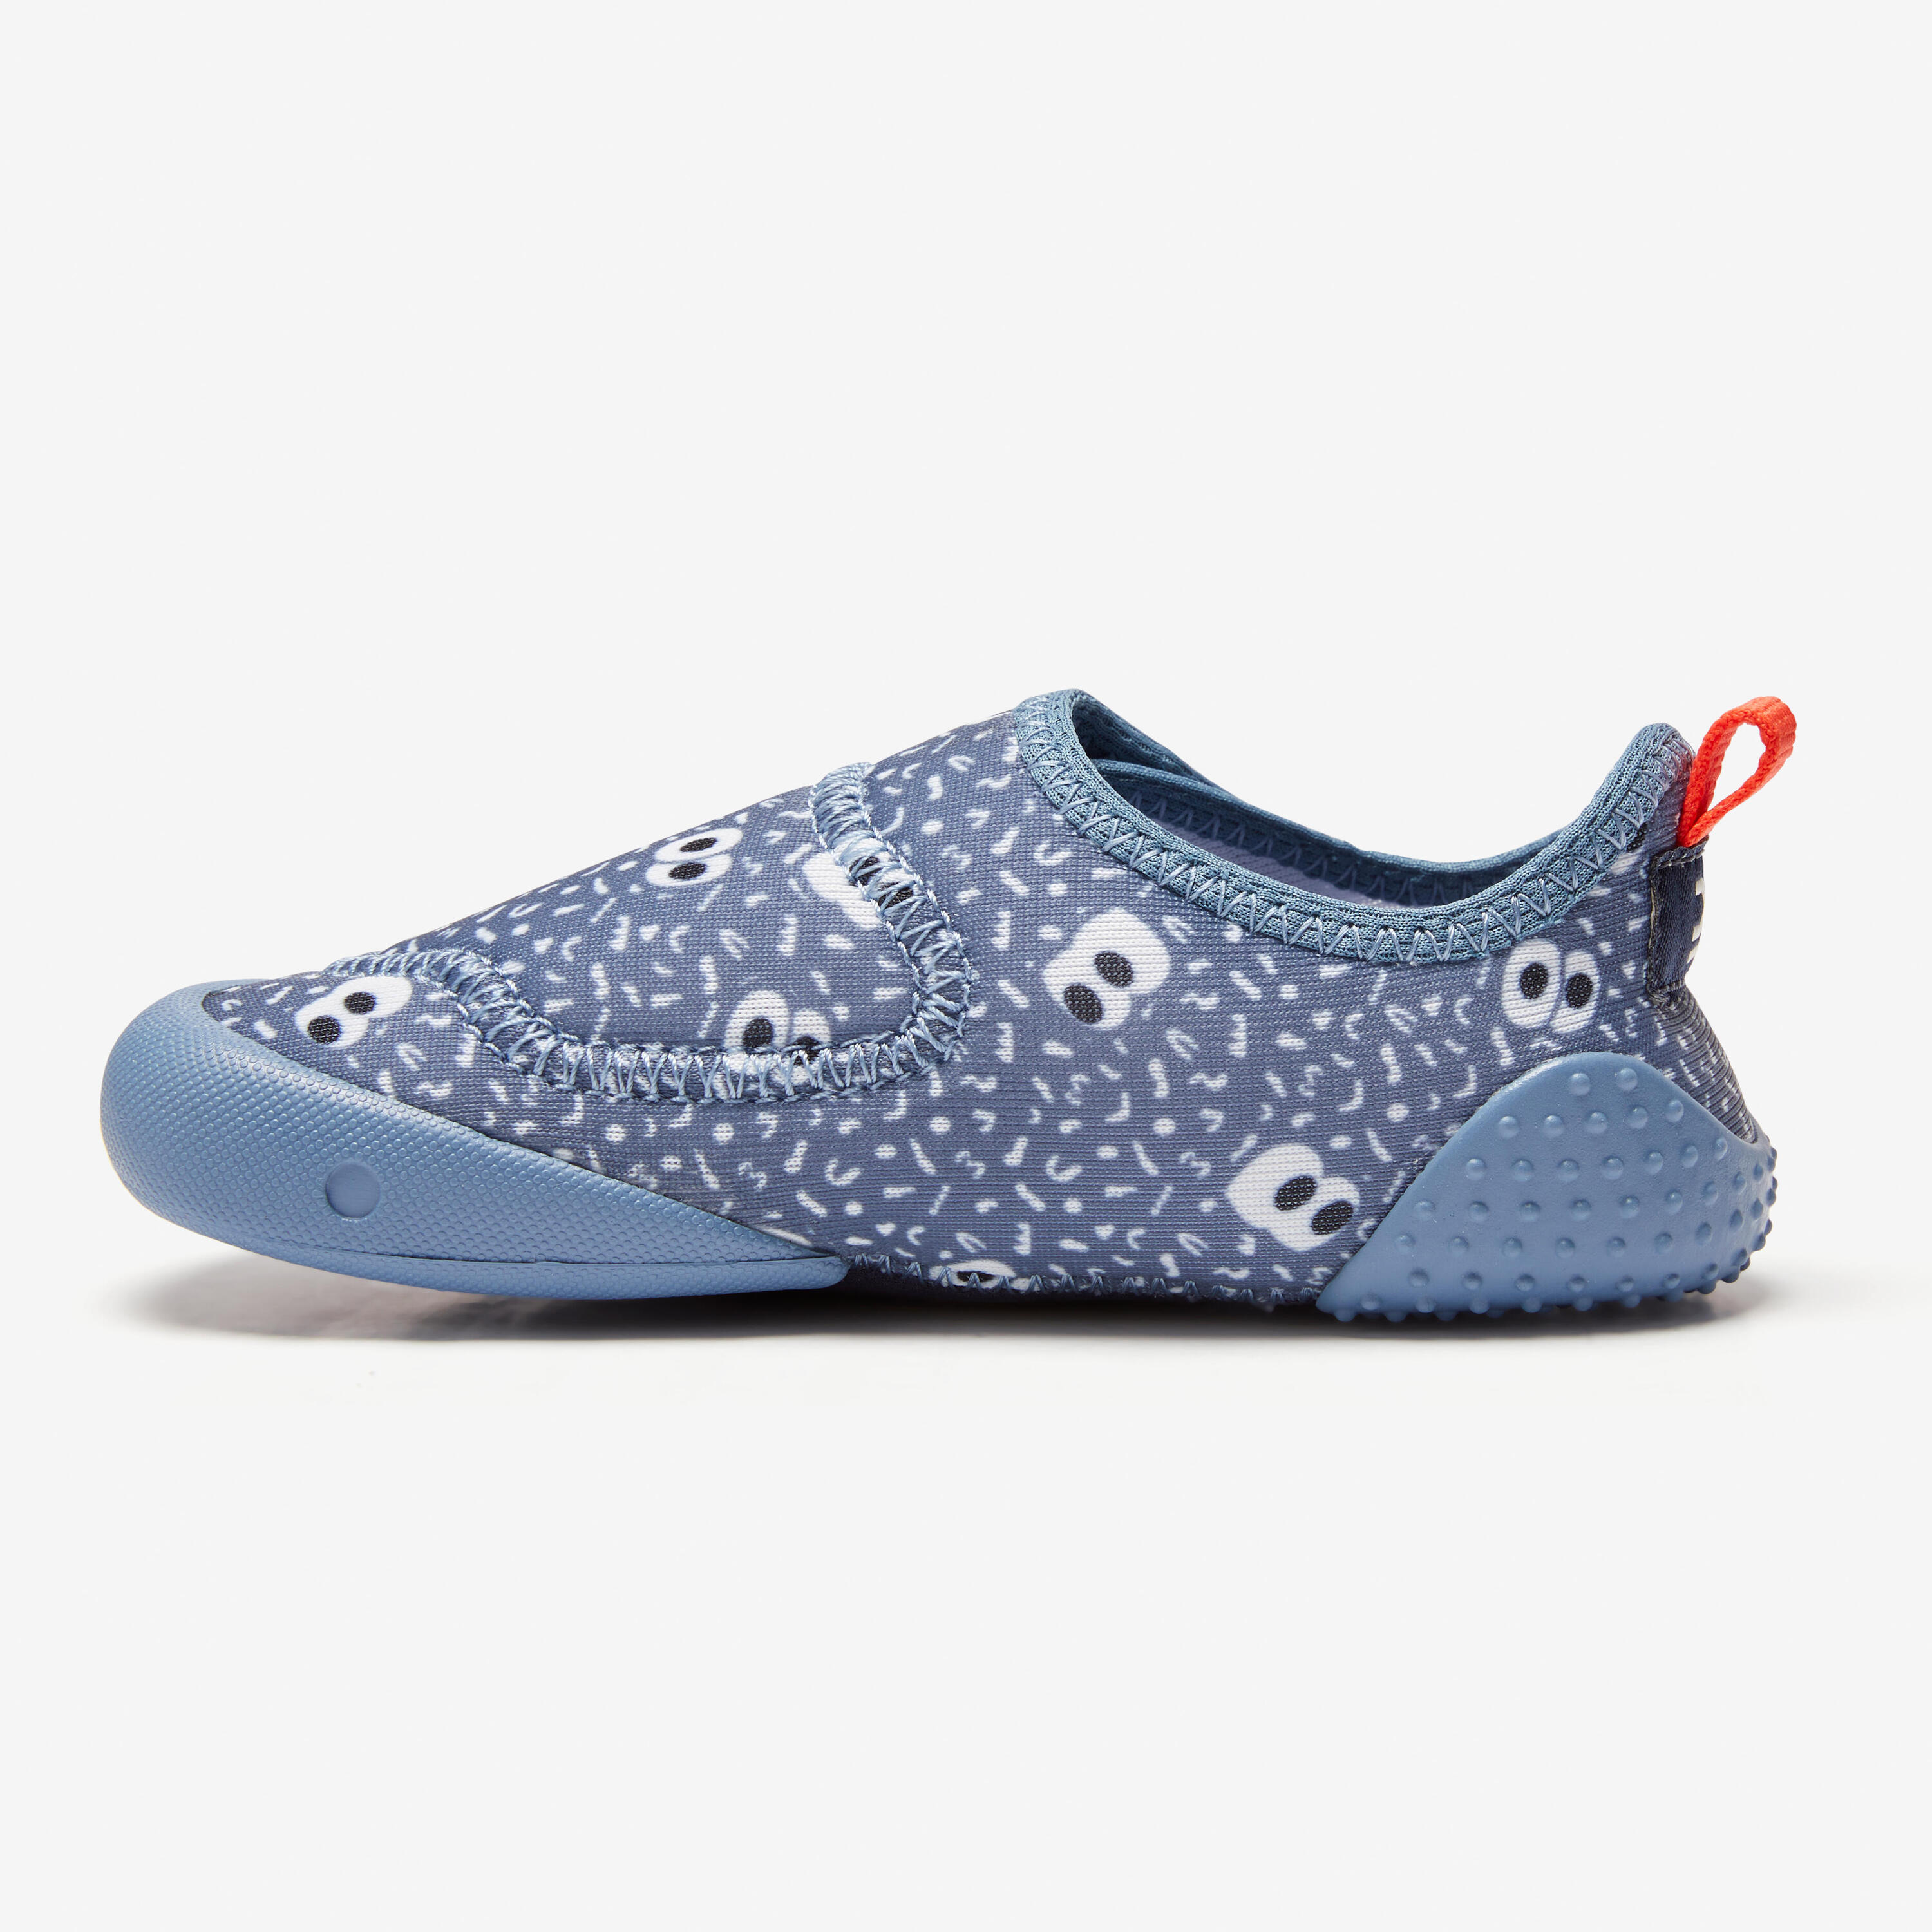 DOMYOS Kids' Non-Slip and Breathable Bootee - Patterns